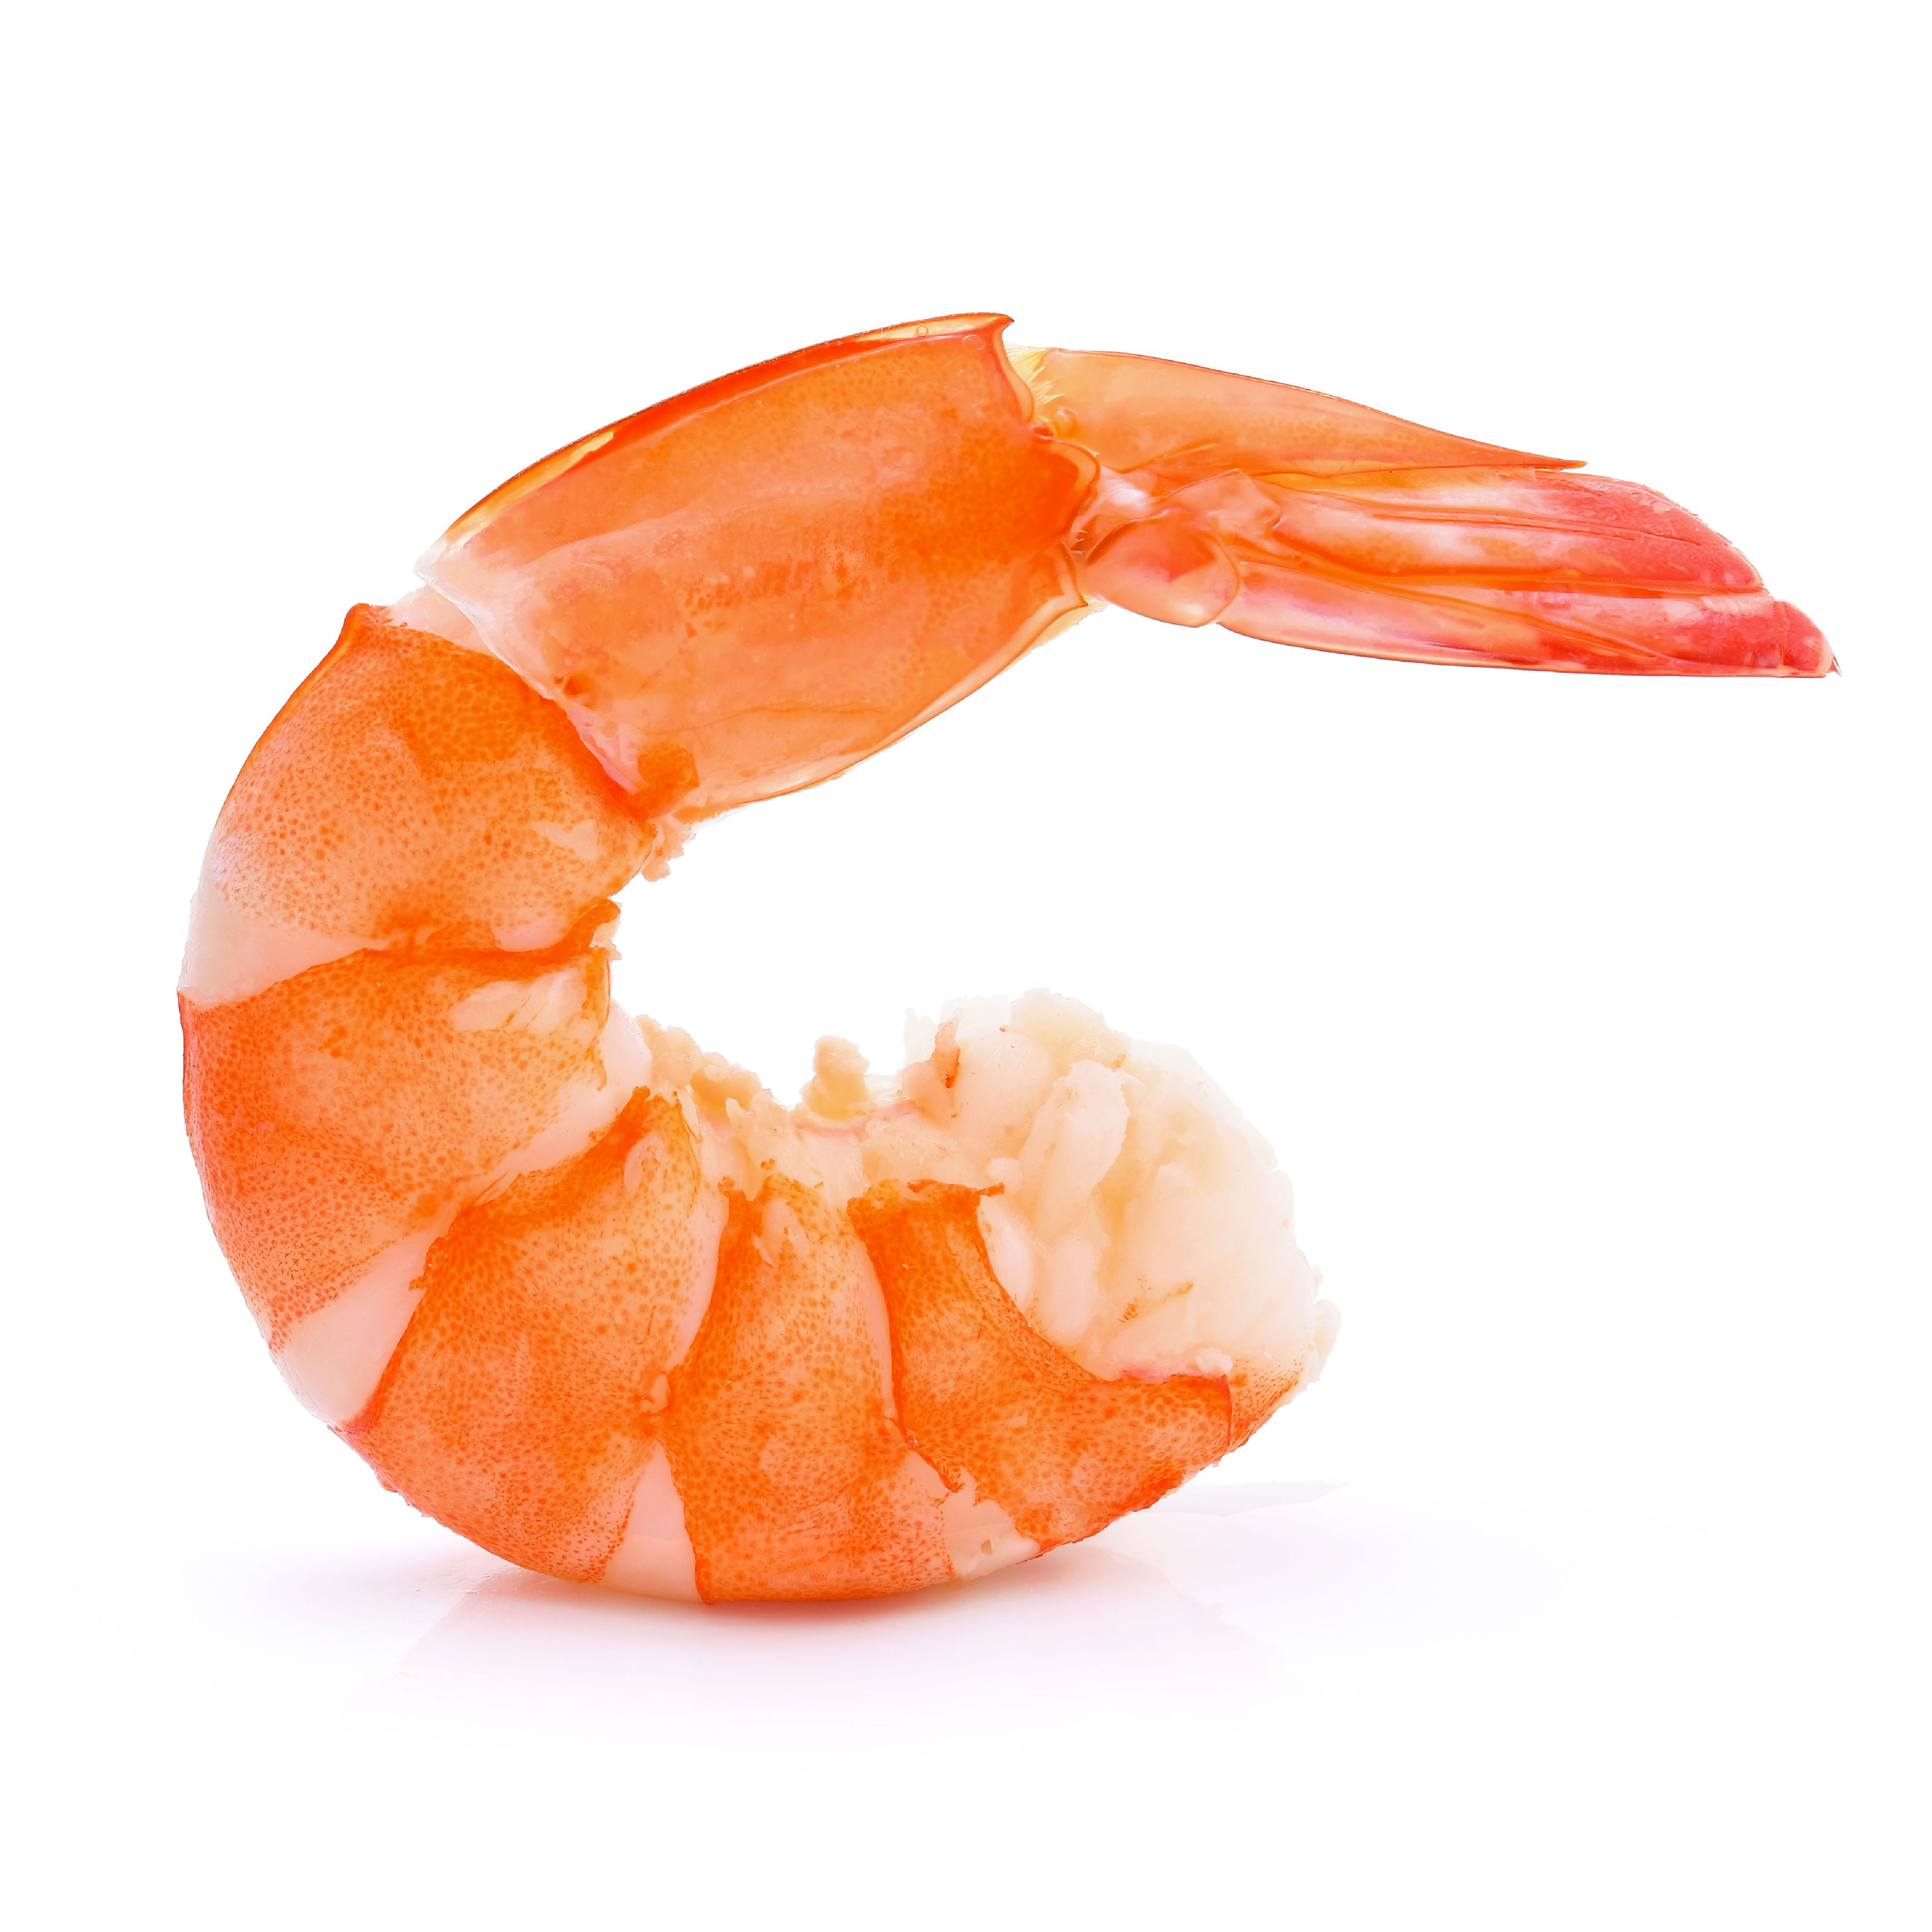 UB Consulting: Have Shrimp Prices in the U.S. Reached a Bottom?